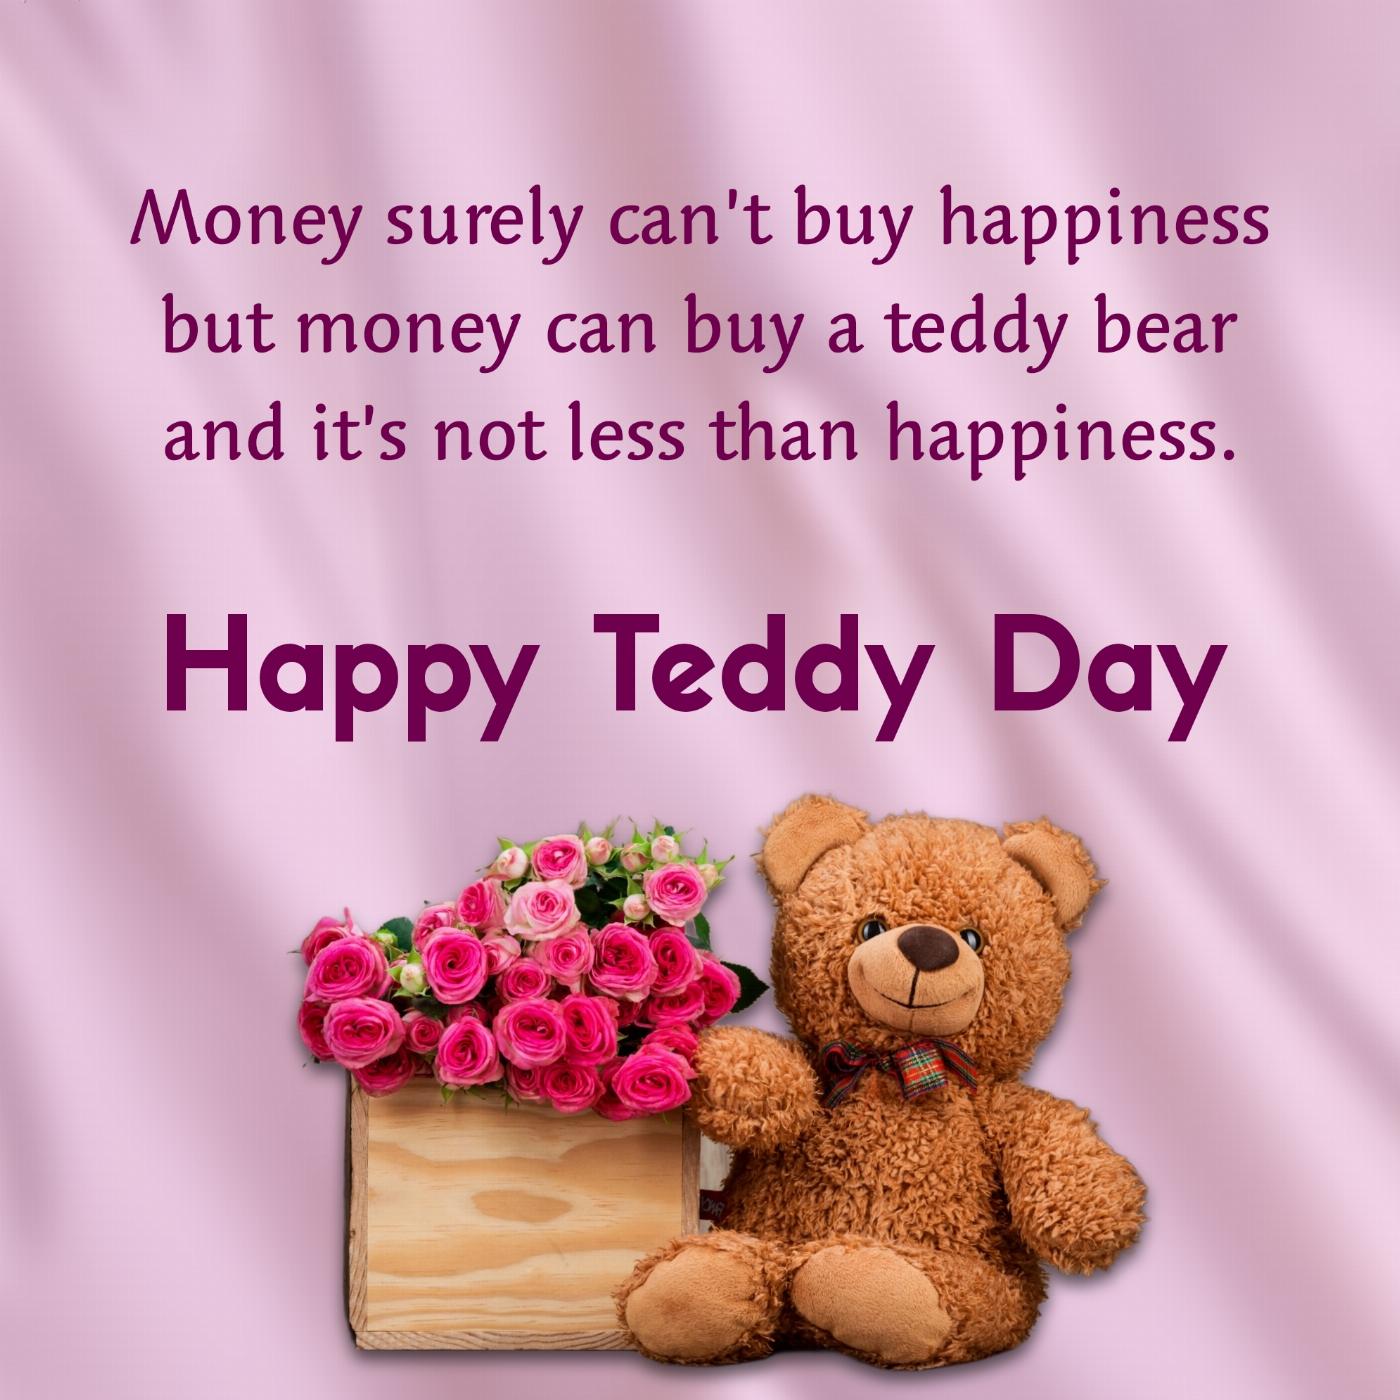 Money surely cant buy happiness but money can buy a teddy